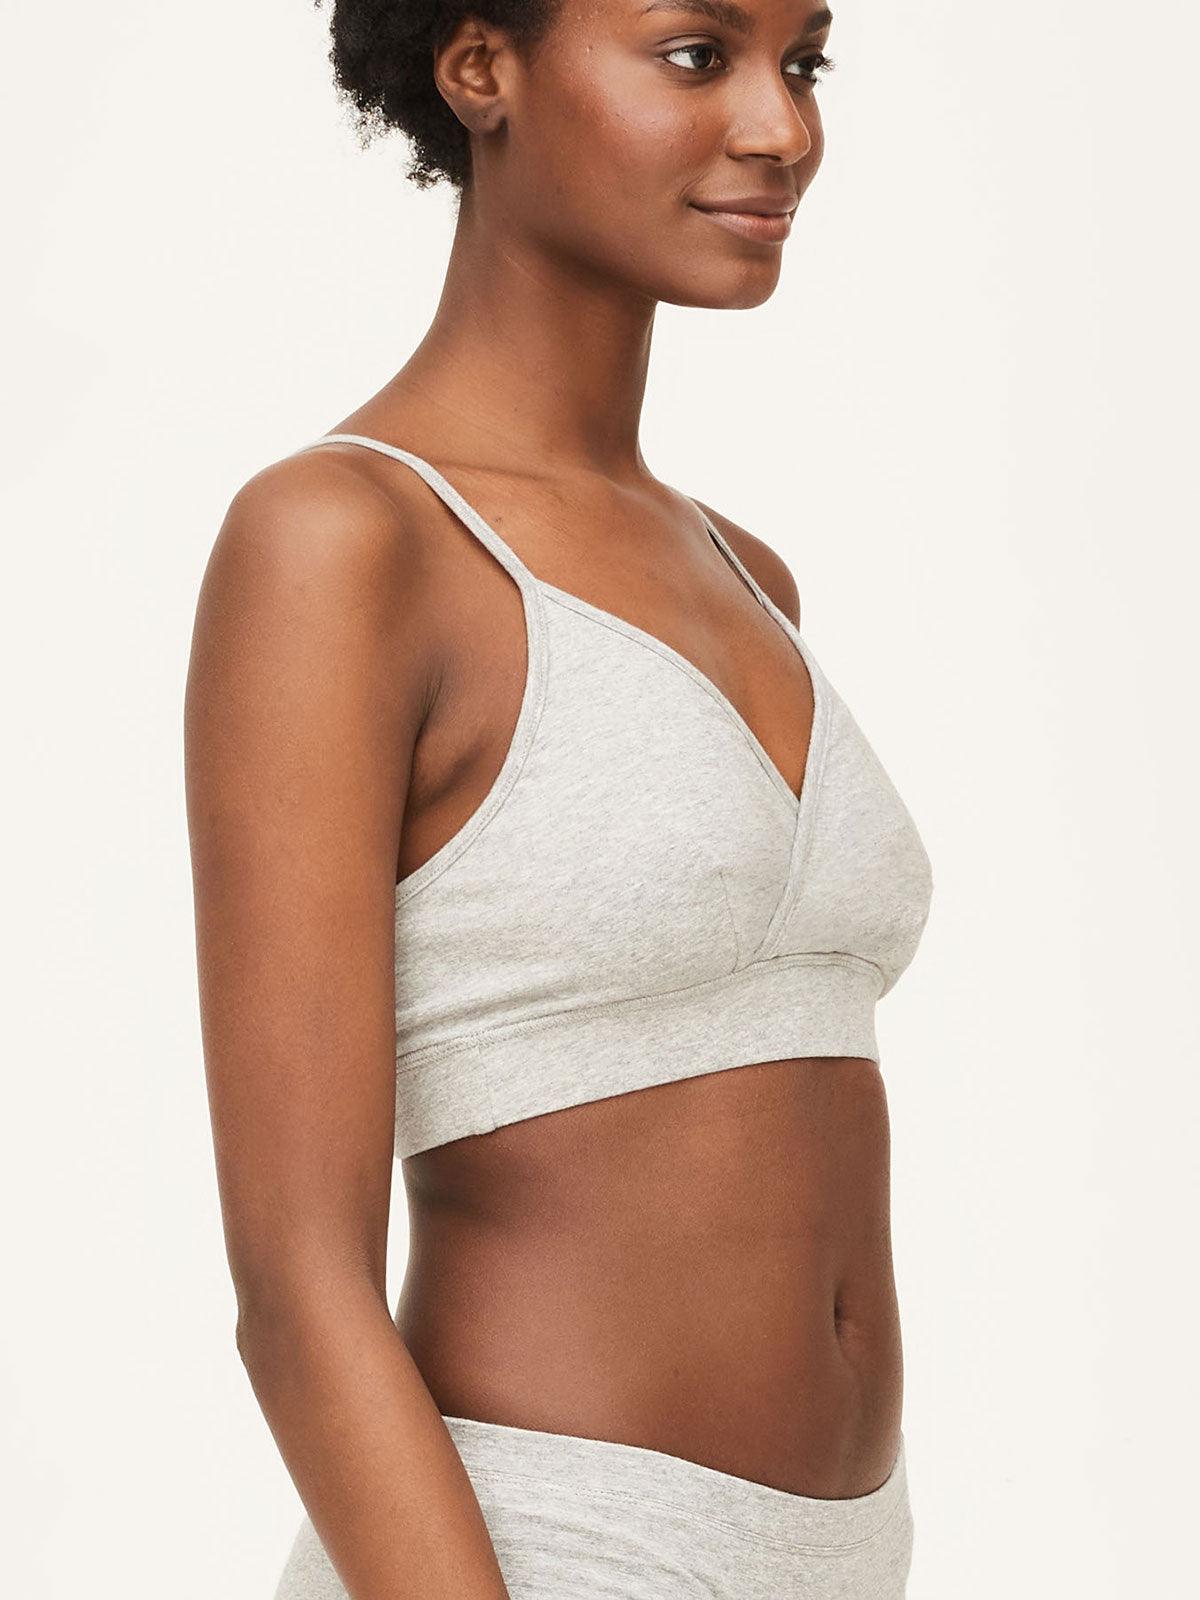 Gots Organic Cotton Jersey Triangle Bralette – From The Source